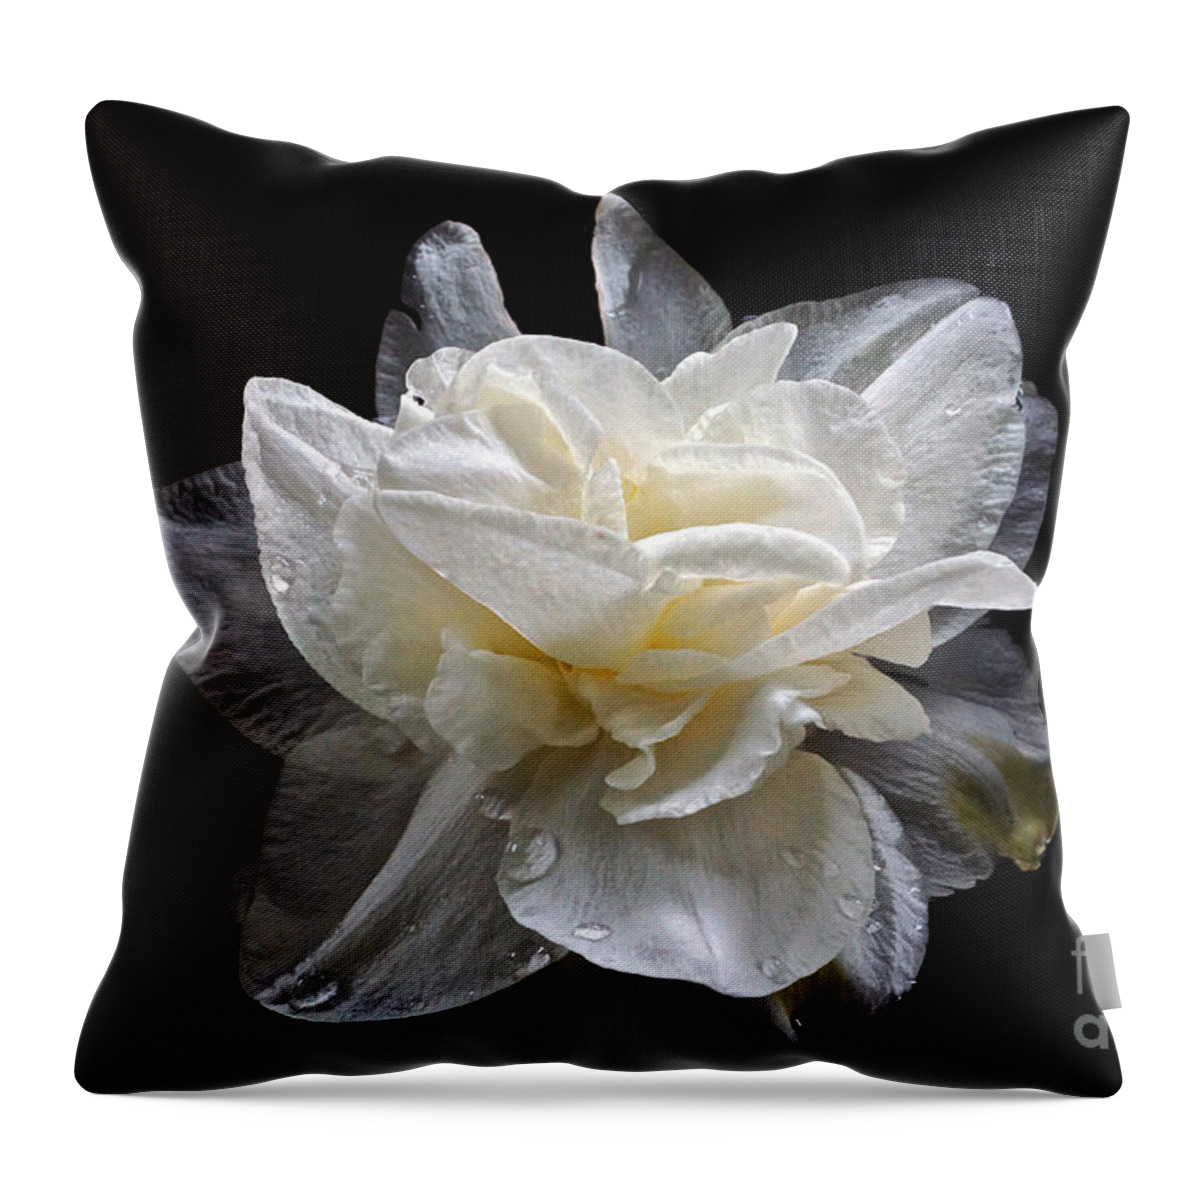 White Double Daffodil Throw Pillow featuring the photograph Double White Daffodil In Dark Water by Byron Varvarigos